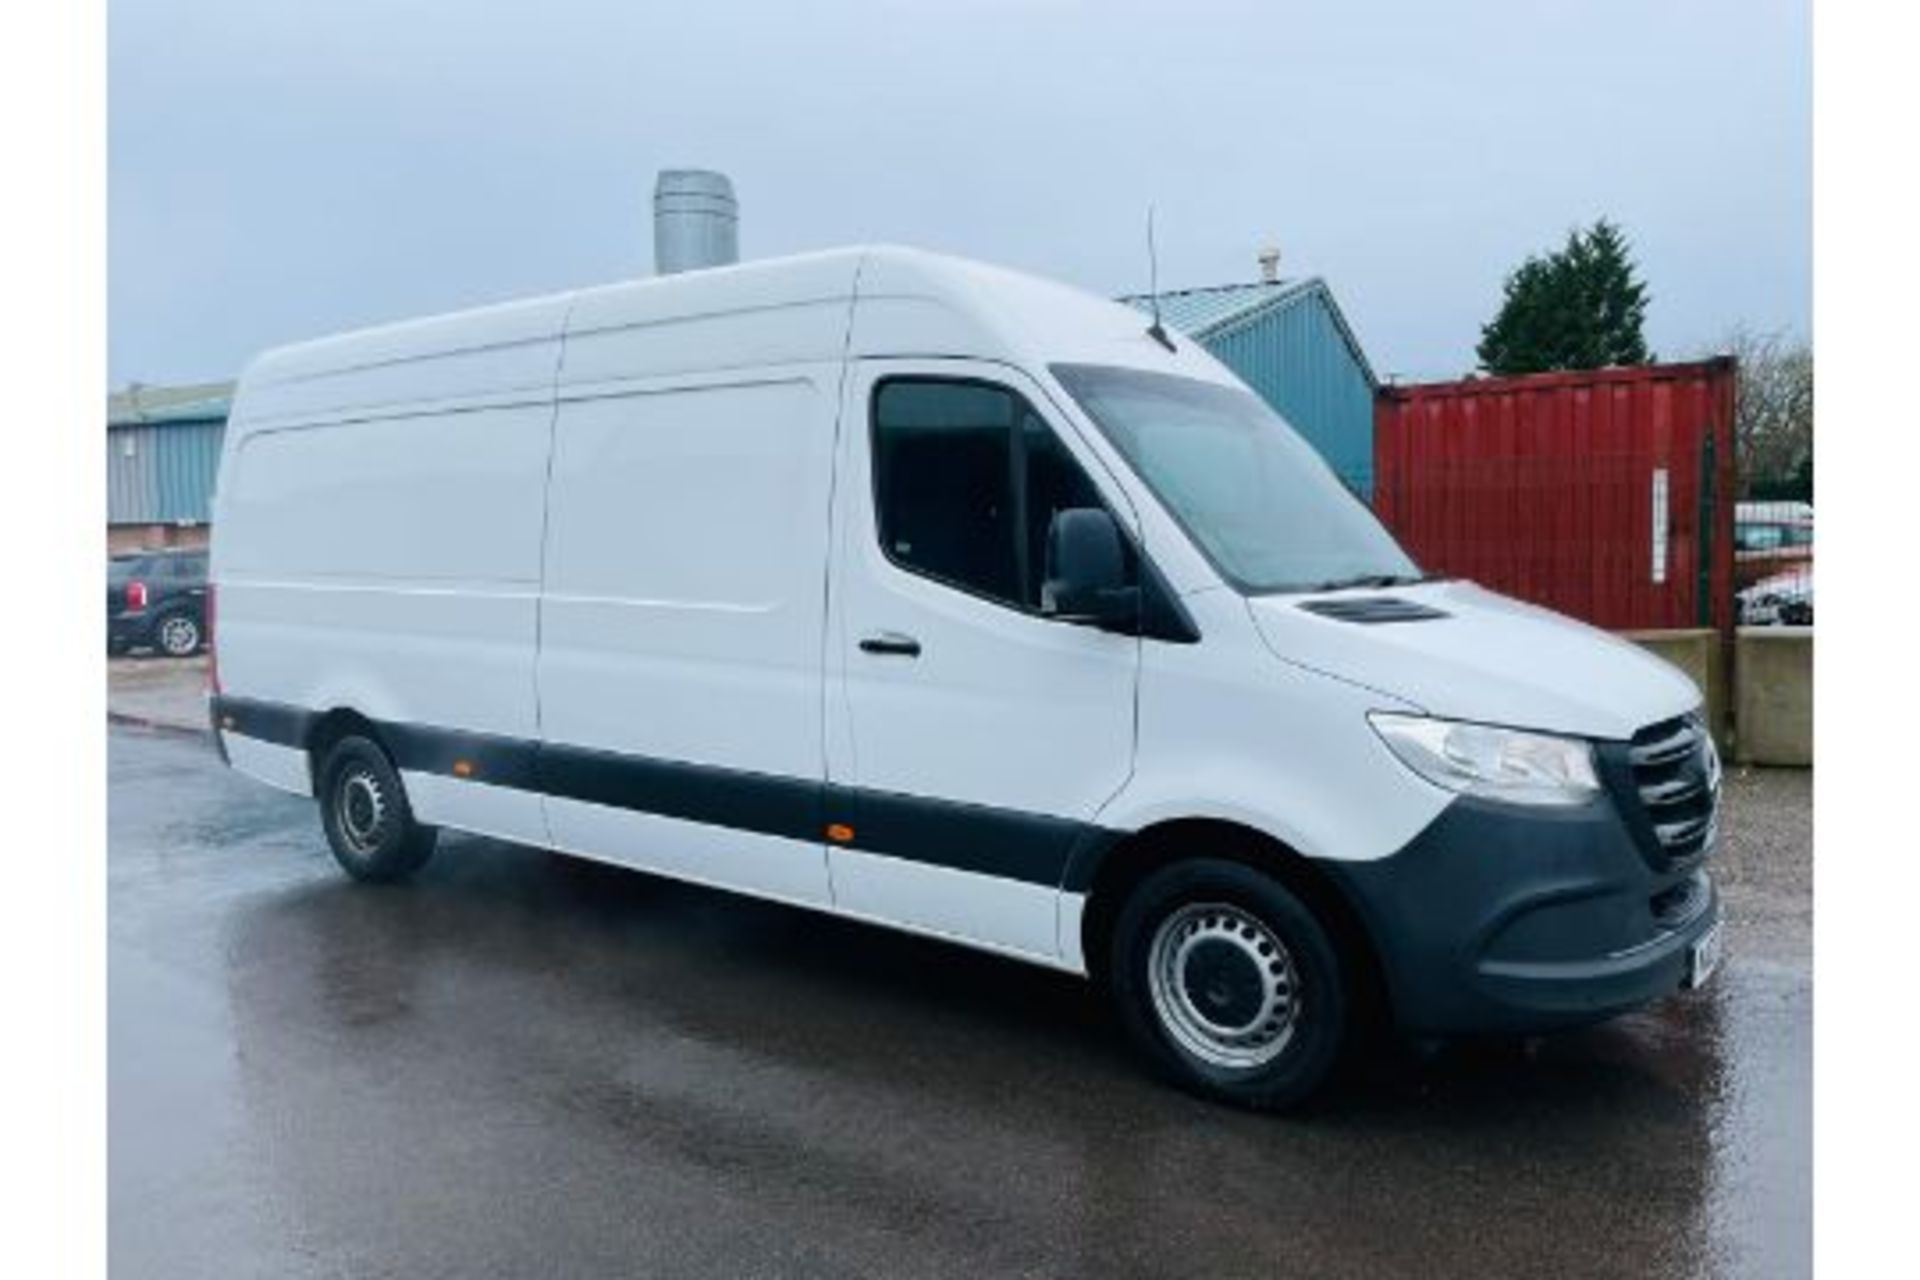 MERCEDES SPRINTER 315CDI LWB HIGH TOP 70 REG 2021 - 1 Owner From New - Euro 6 - Image 3 of 13